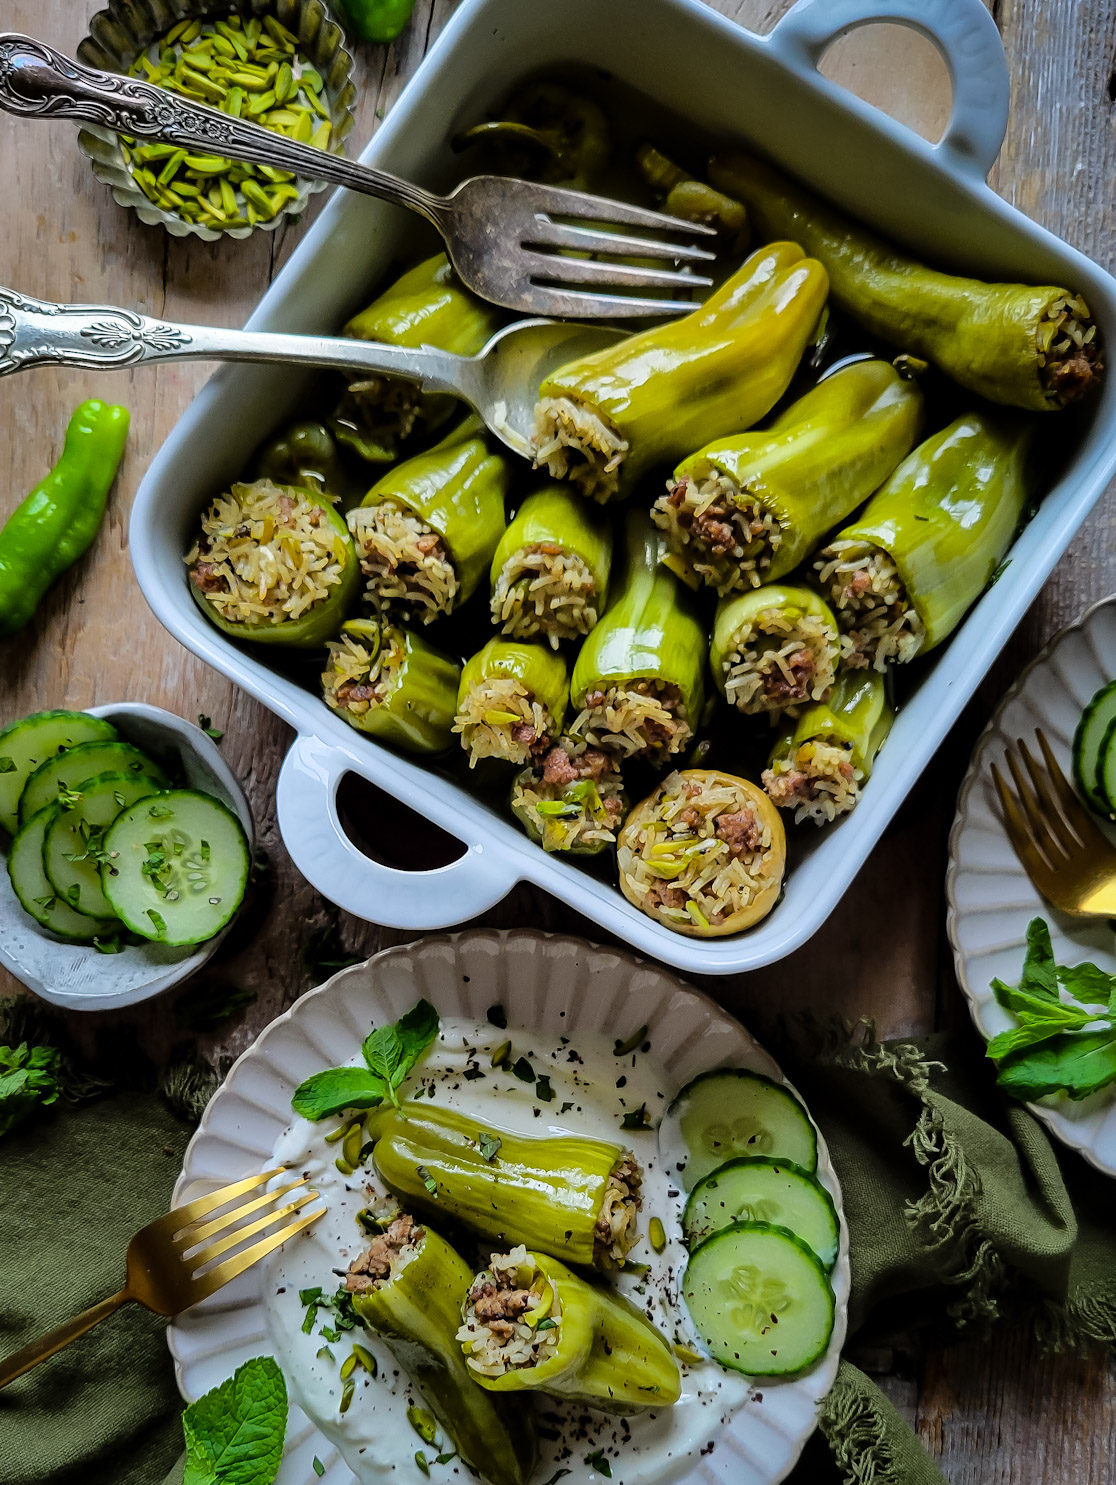 A baking dish filled with baked lamb and rice stuffed mini peppers. Nearby is a plate with cumin yogurt, three stuffed peppers, and cucumber slices. More cucumber slices, mint leaves and pistachios are on the side